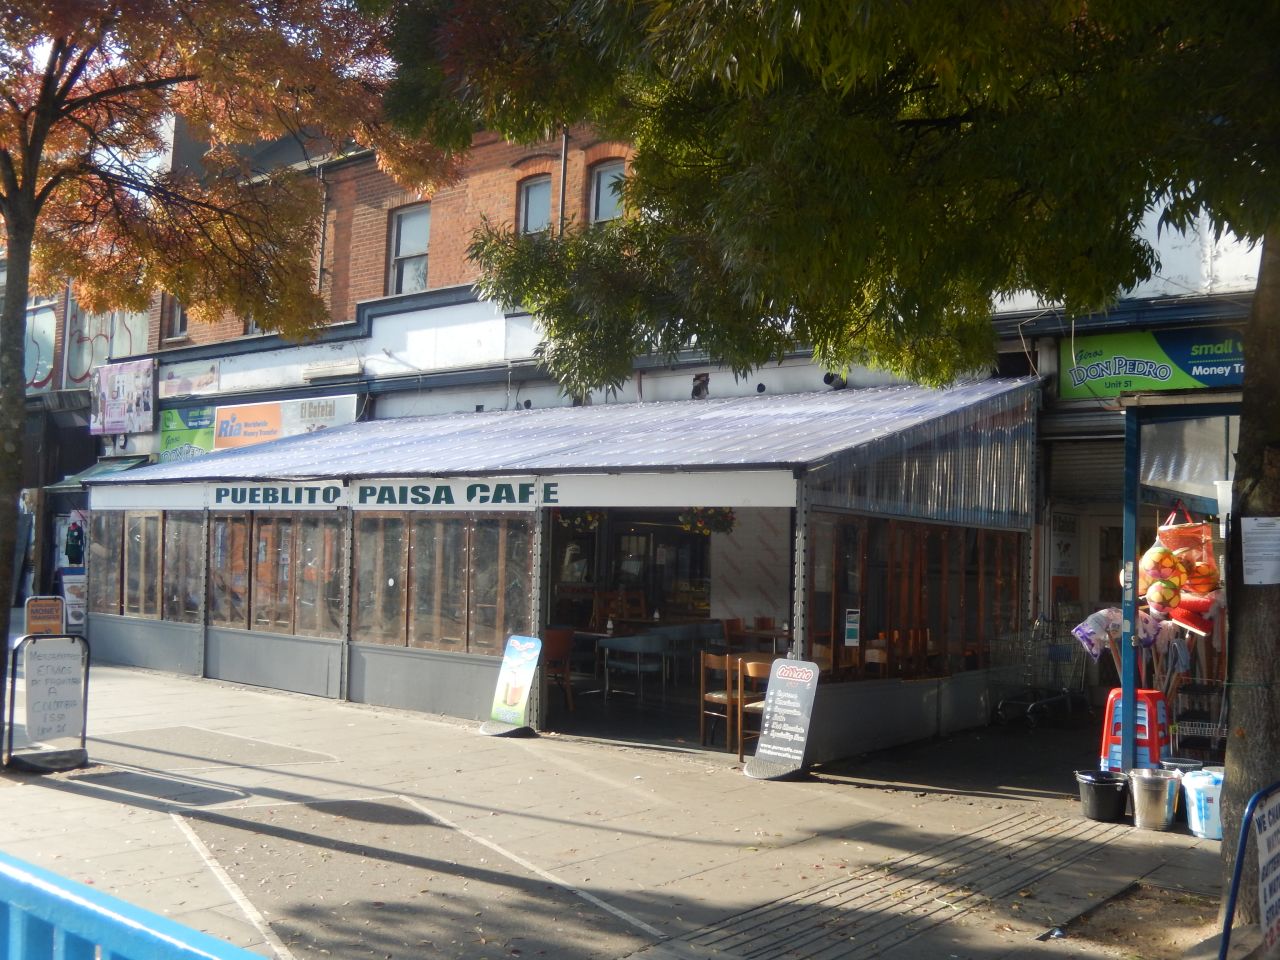 The 'Pueblito Paisa' cafe at the front of Seven Sisters market, a popular location for concerts, live sport and empanadas. <br /><br />Pueblito - meaning little village - is also used as a name the indoor market